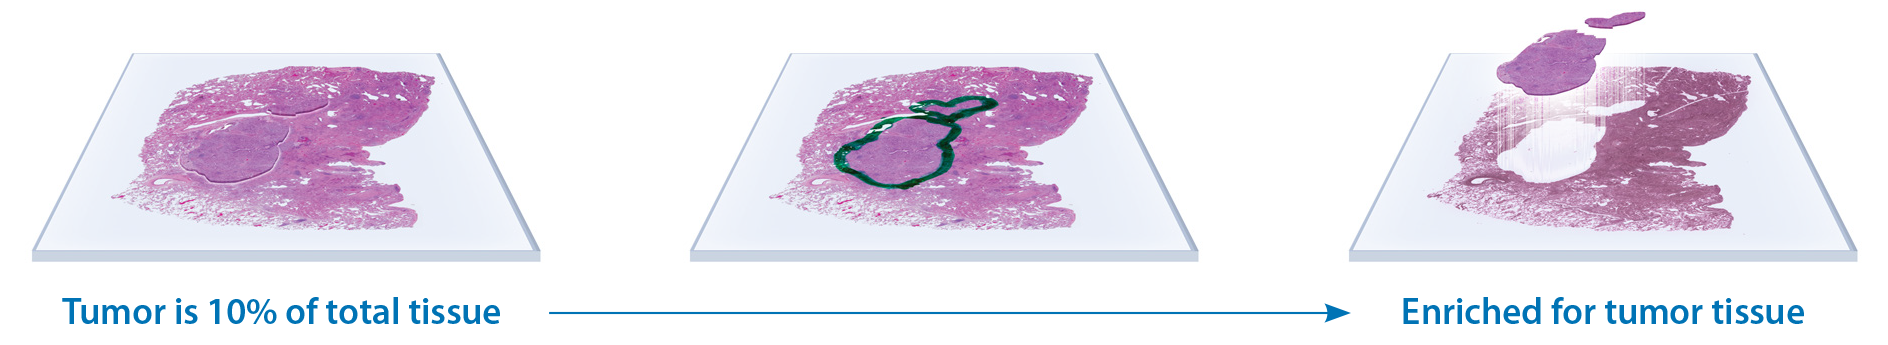 Tissue Microdissection | Tissue Profiling